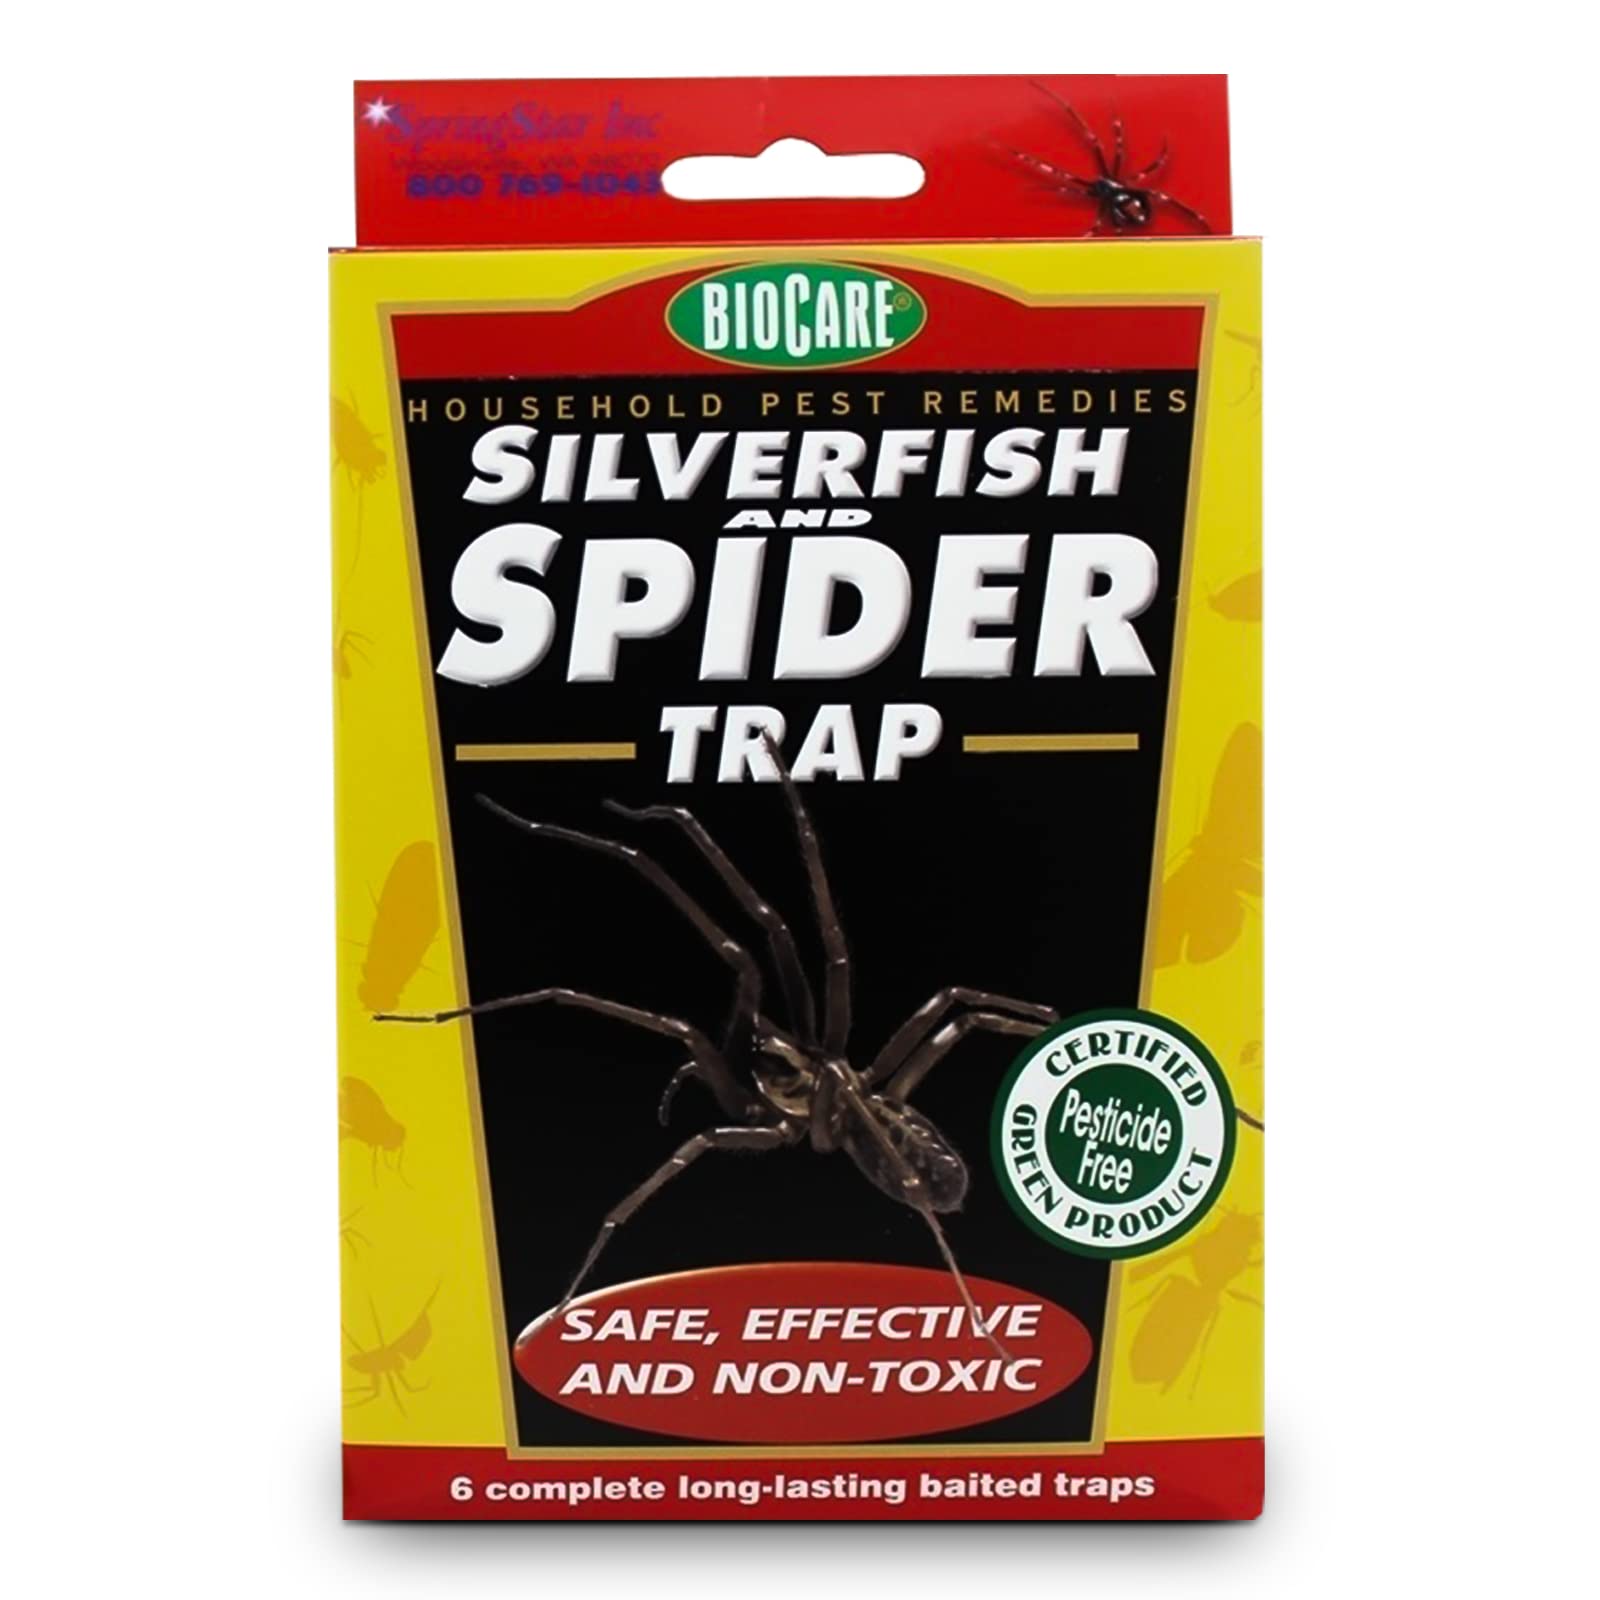 Springstar Biocare Spider & Silverfish Trap- Pet Safe Bait Trap-Spider Traps for Inside Your Home- Powerful Sticky Trap Baits-Available with Premium Quality Gloves- 12 Traps